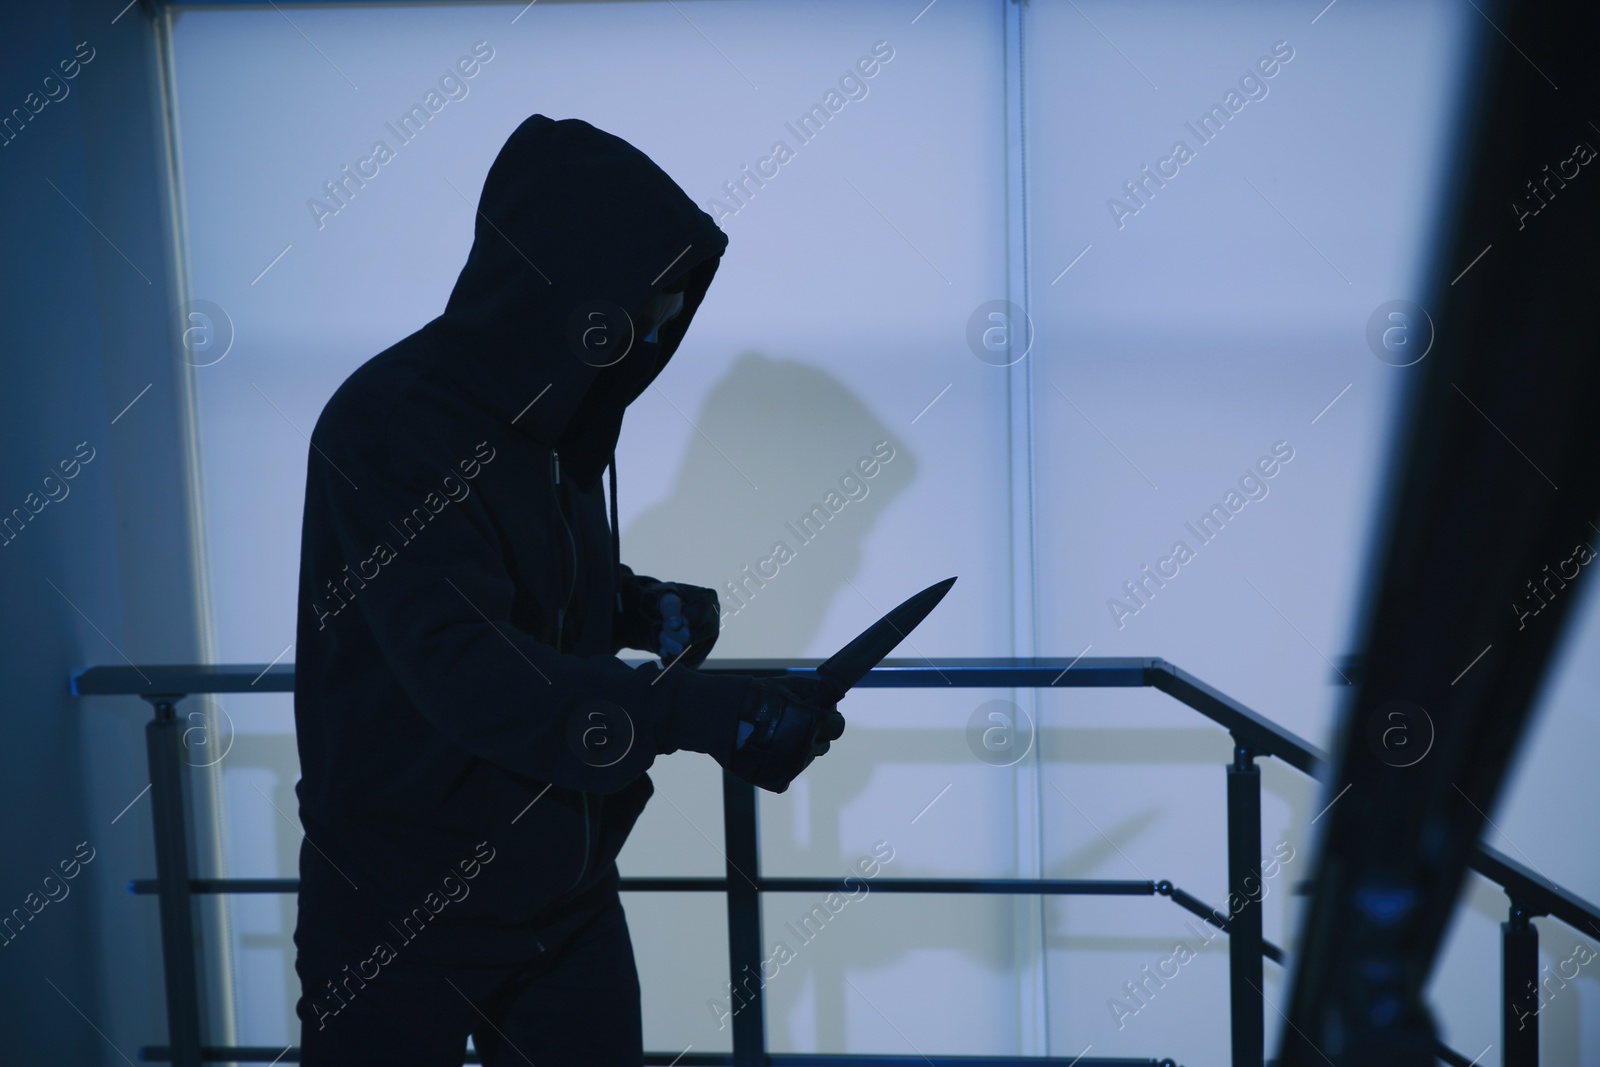 Photo of Man in mask with knife on stairs indoors, space for text. Dangerous criminal